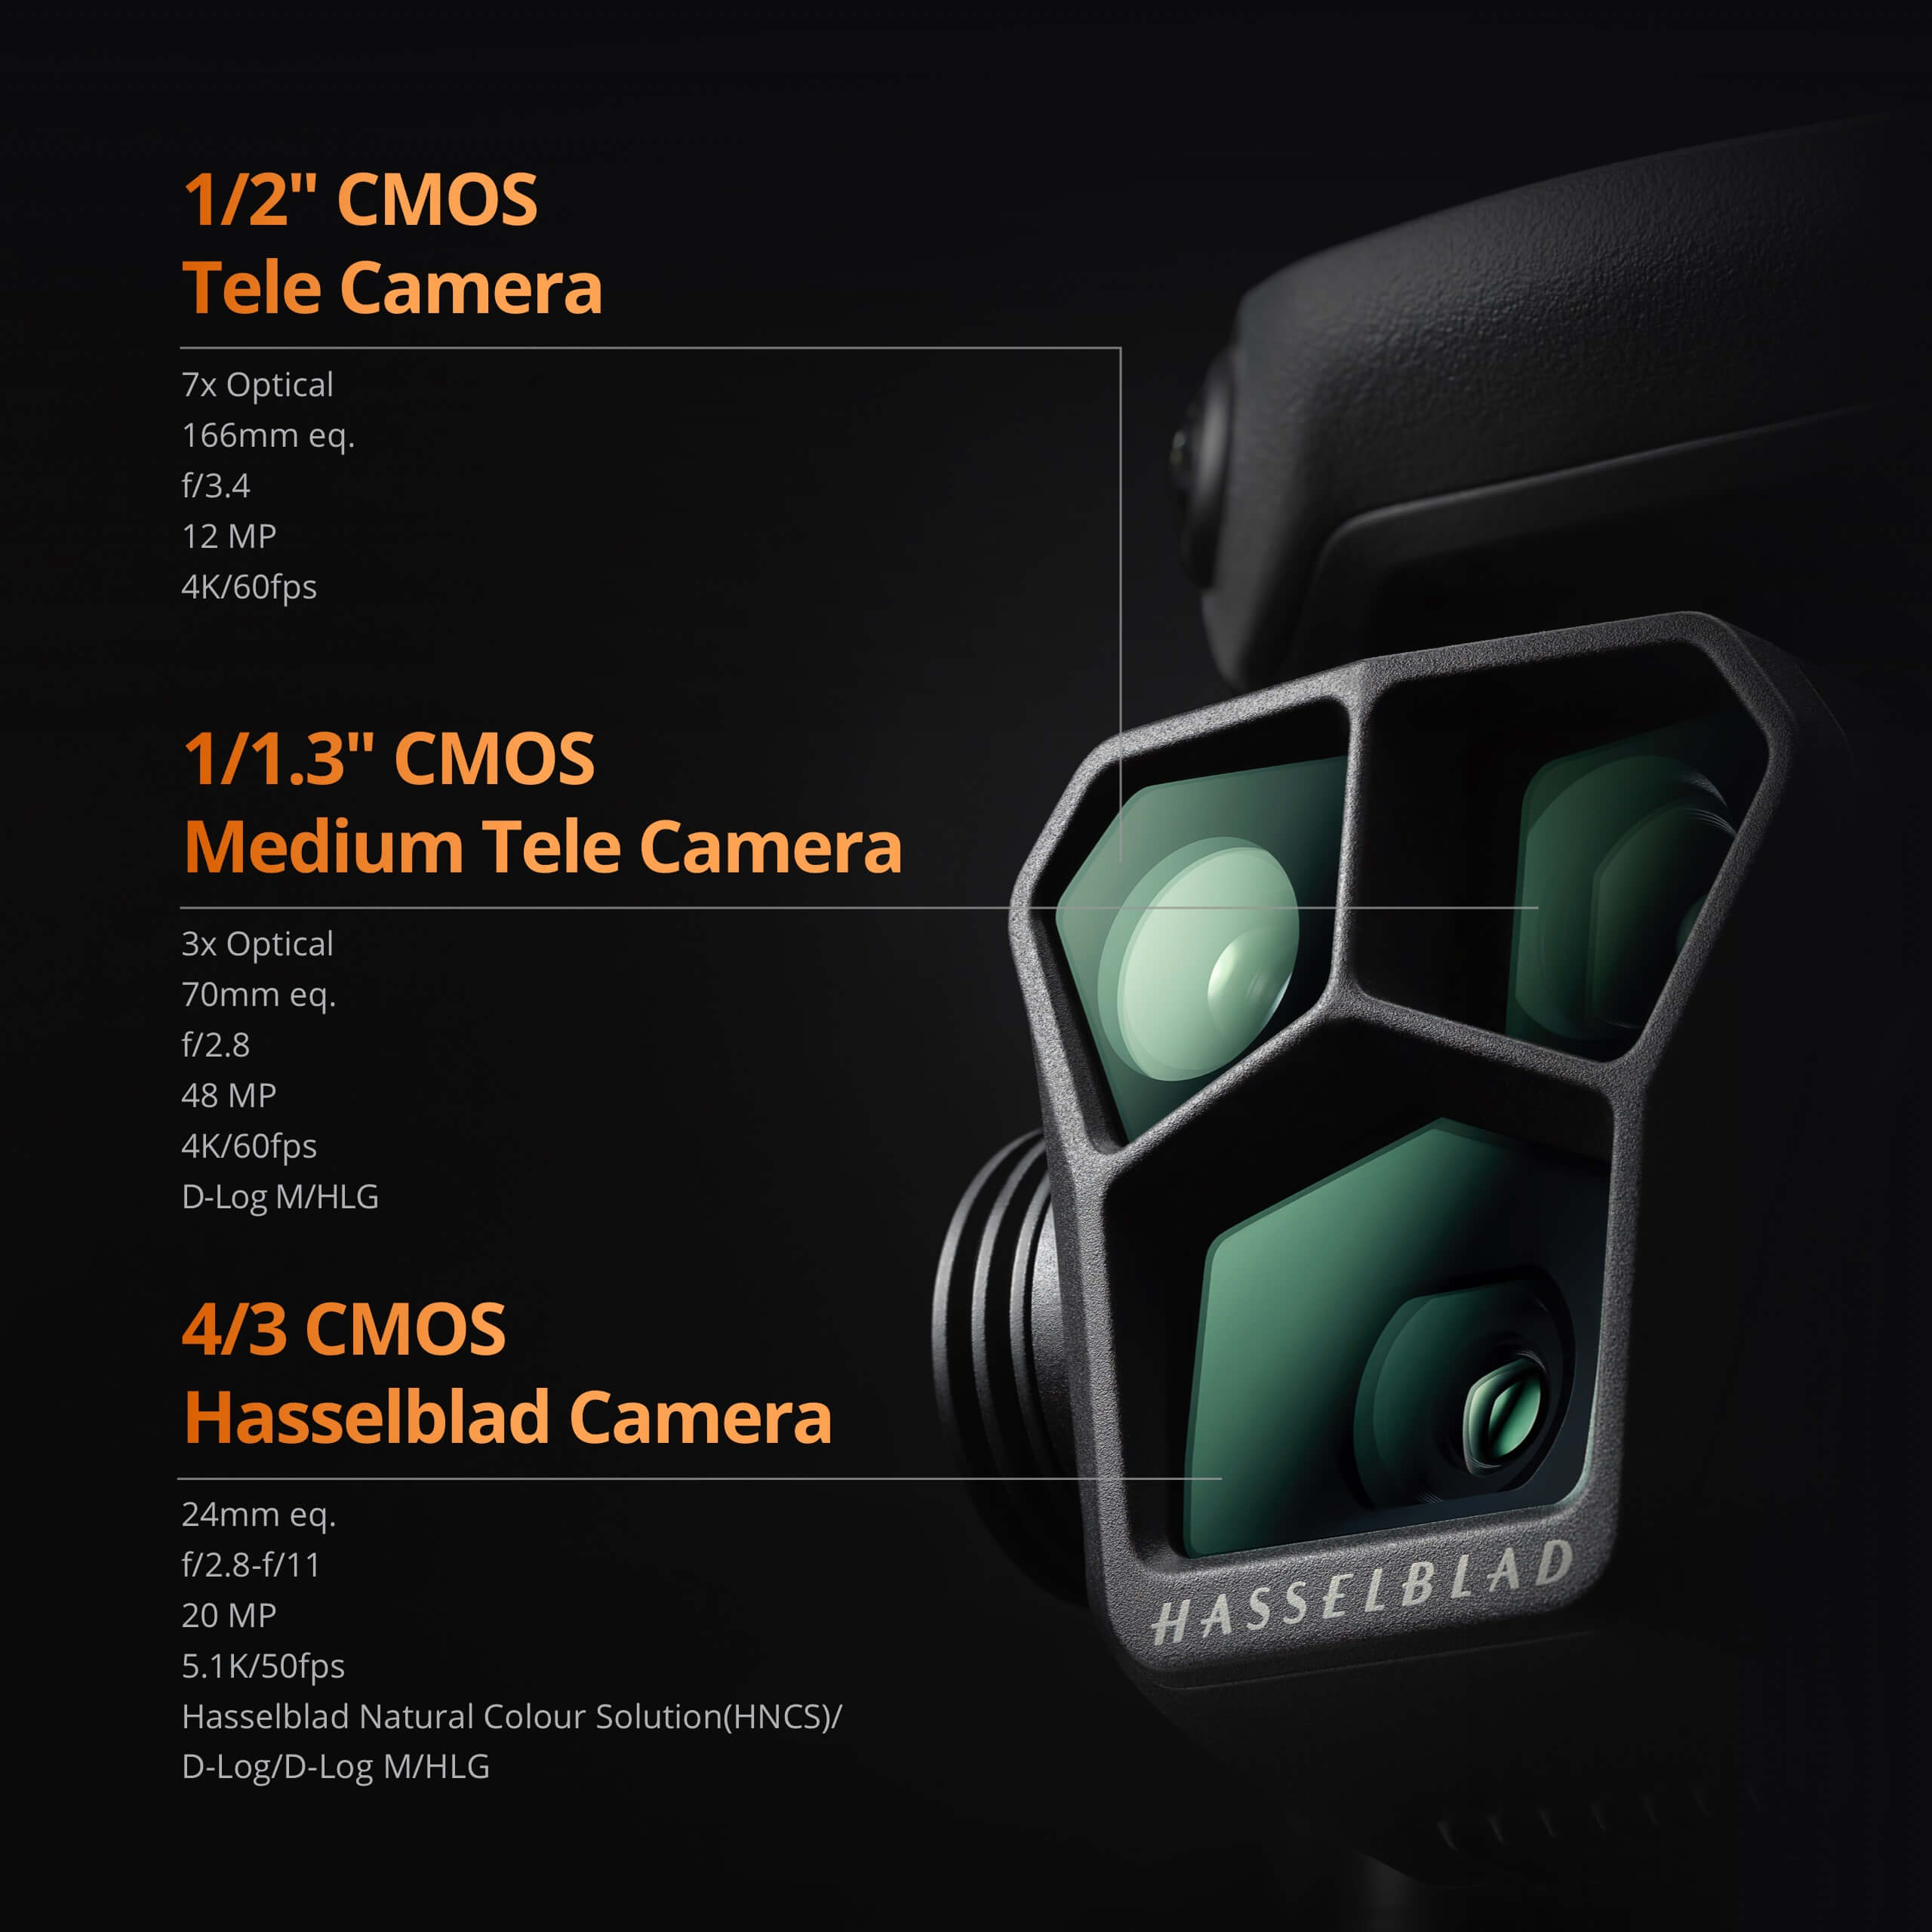 Each camera labelled with the specs